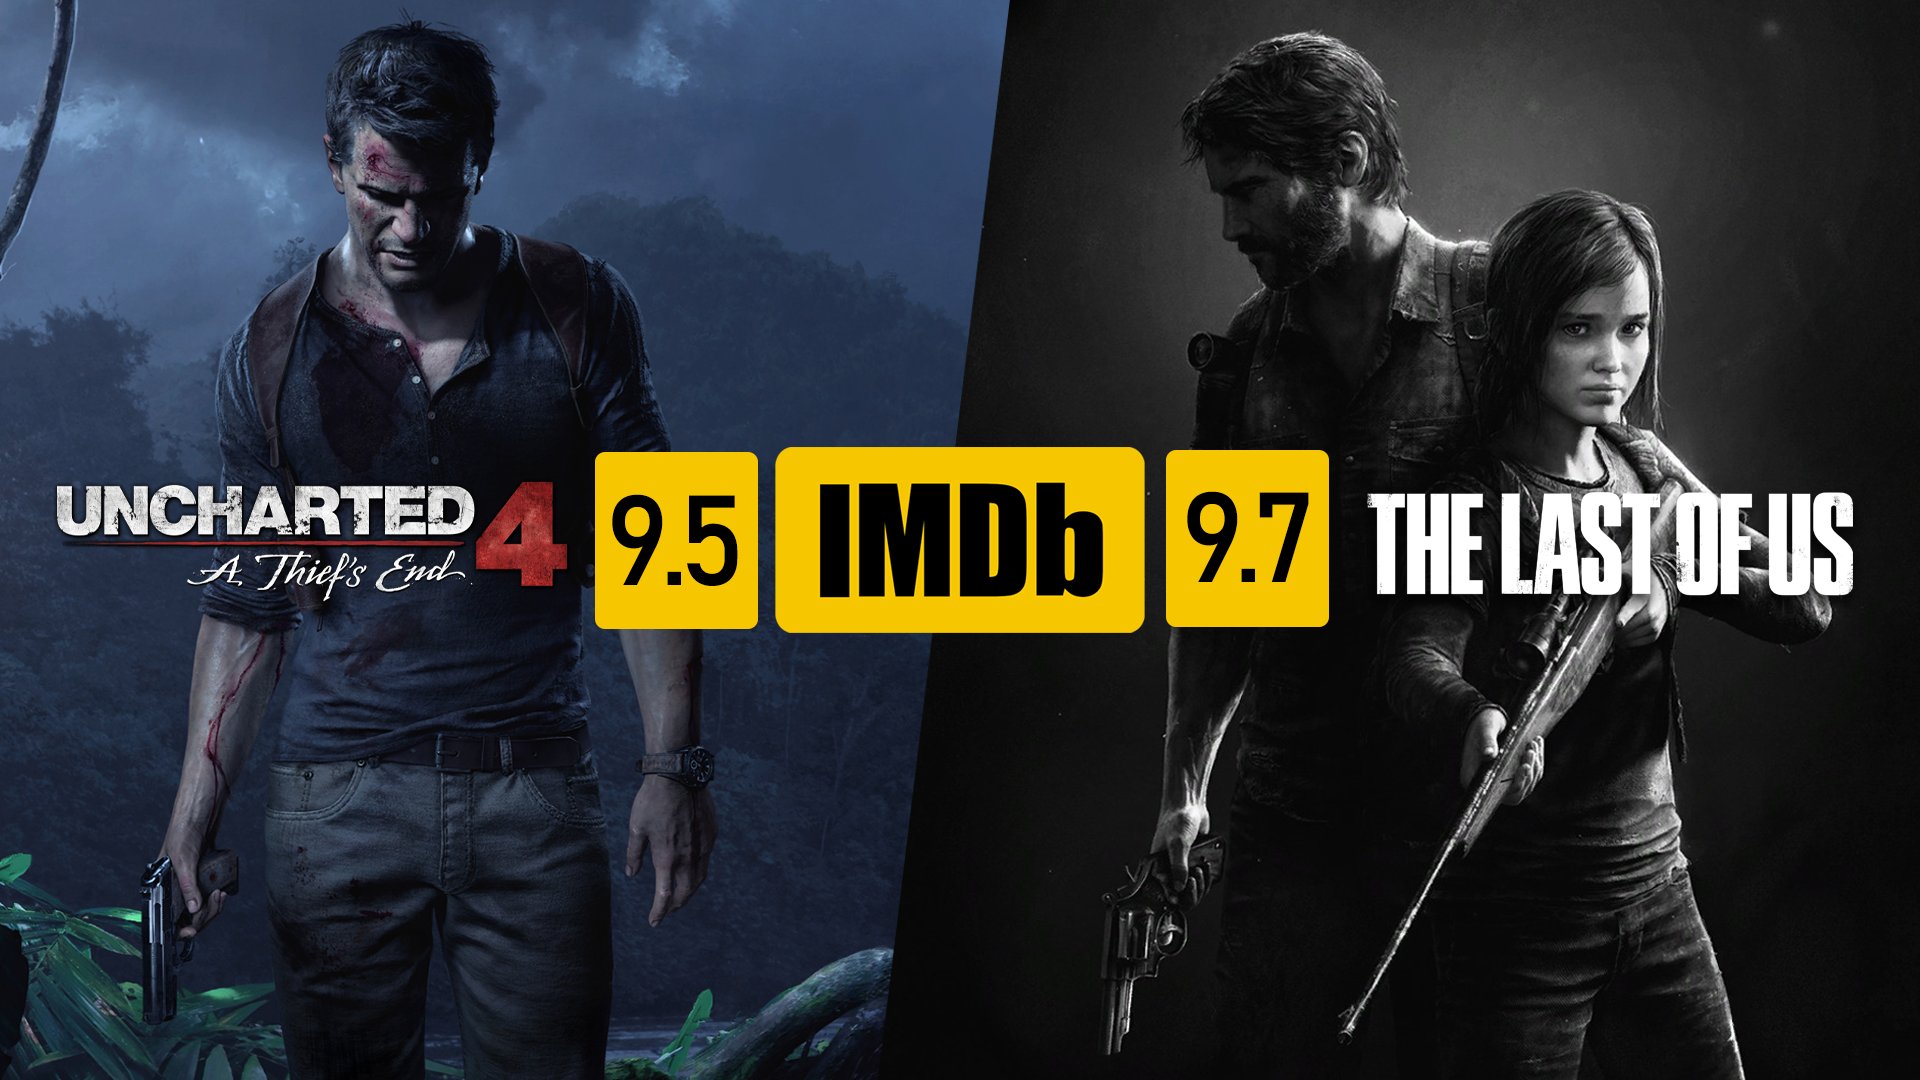 Imdb Last Of Us Naughty Dog Info on Twitter: "Uncharted 4 has an IMDb score of 9.5 The Last  of Us has an IMDb score of 9.7 This makes them one of the highest rated  video